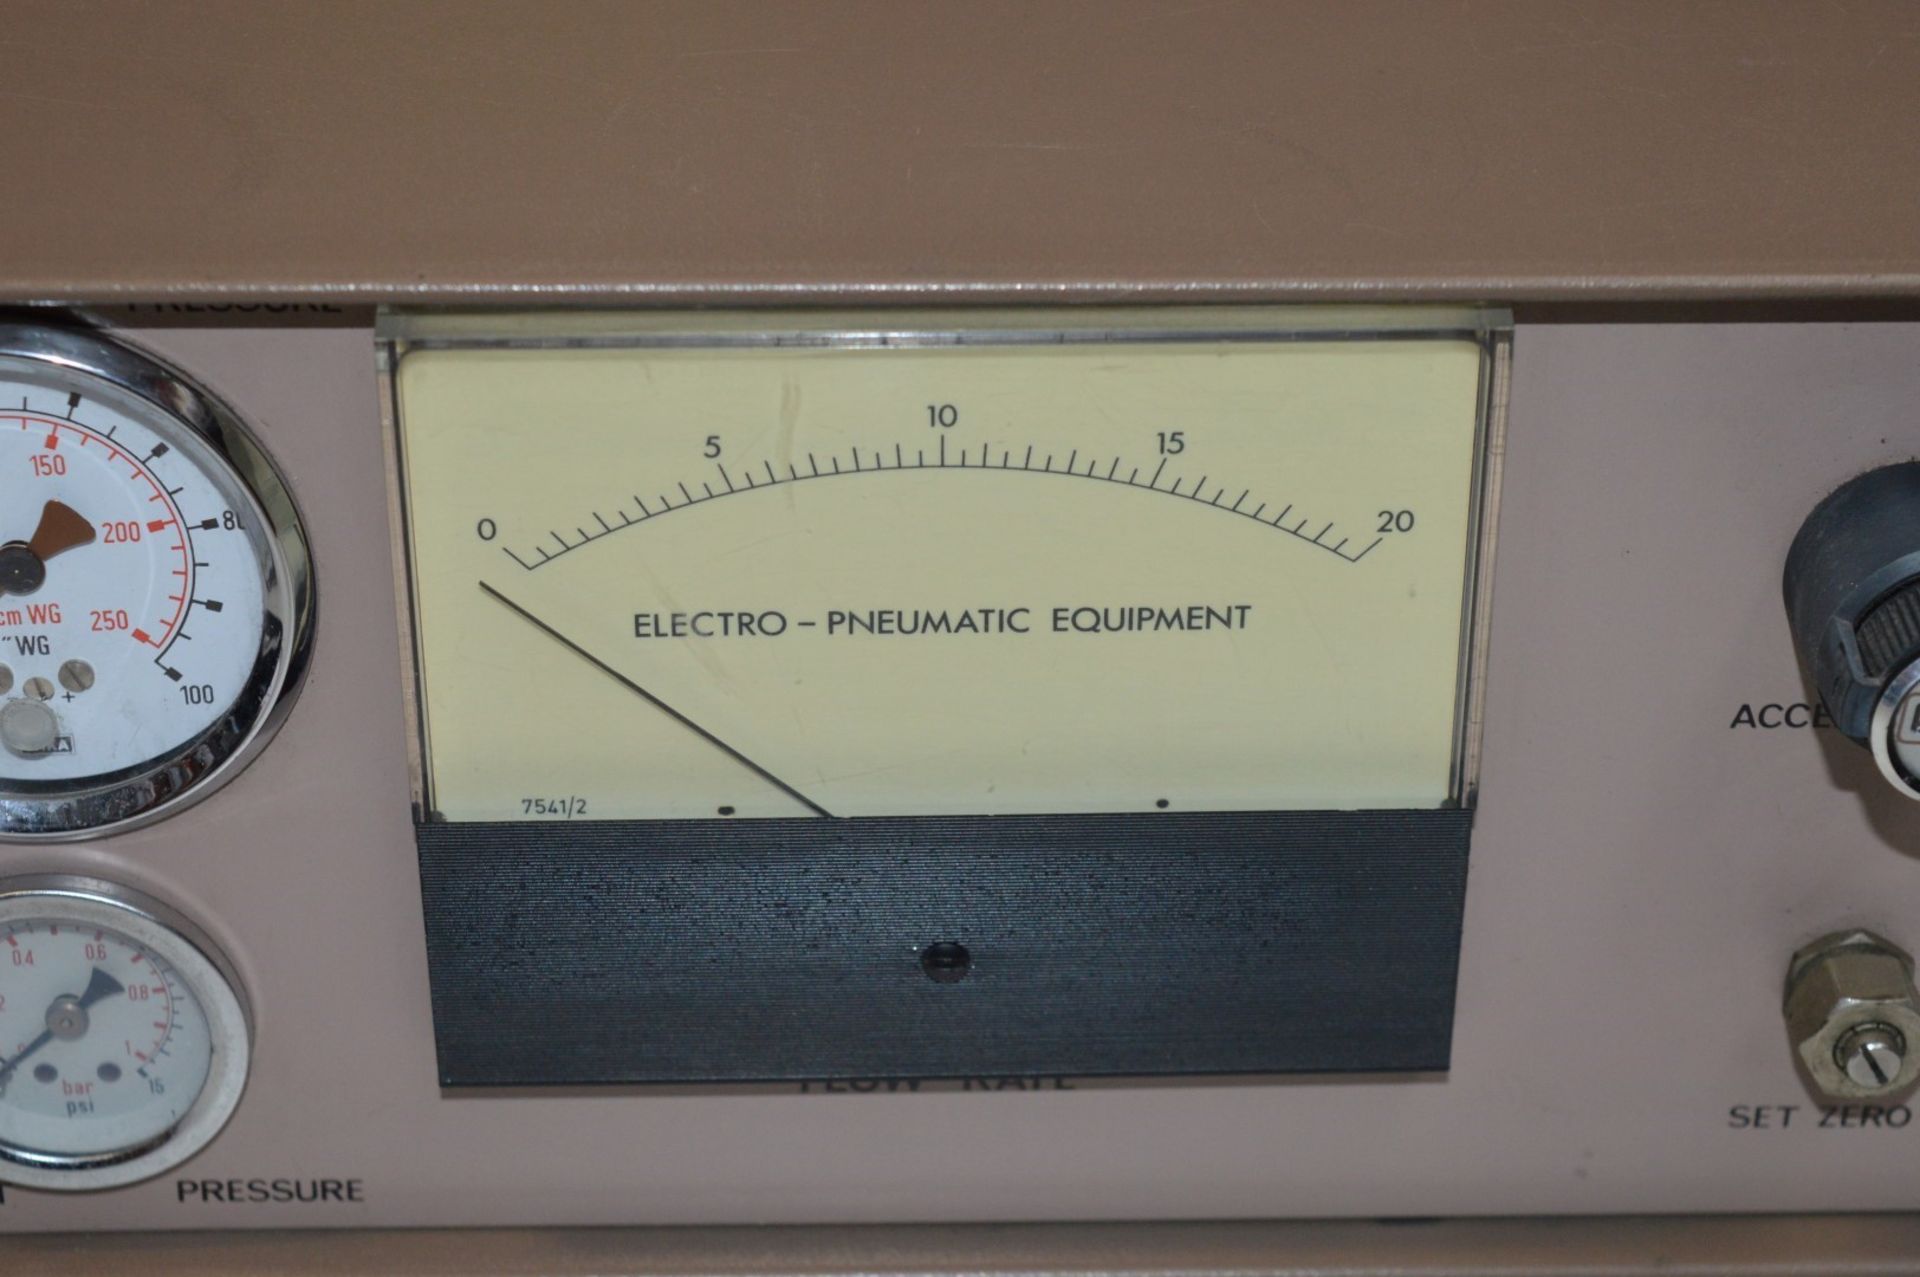 1 x Epetron 200 Mk2 Electro Pneumatic Tester - Vintage Test Equipment - CL011 - Ref J611 - Location: - Image 8 of 8